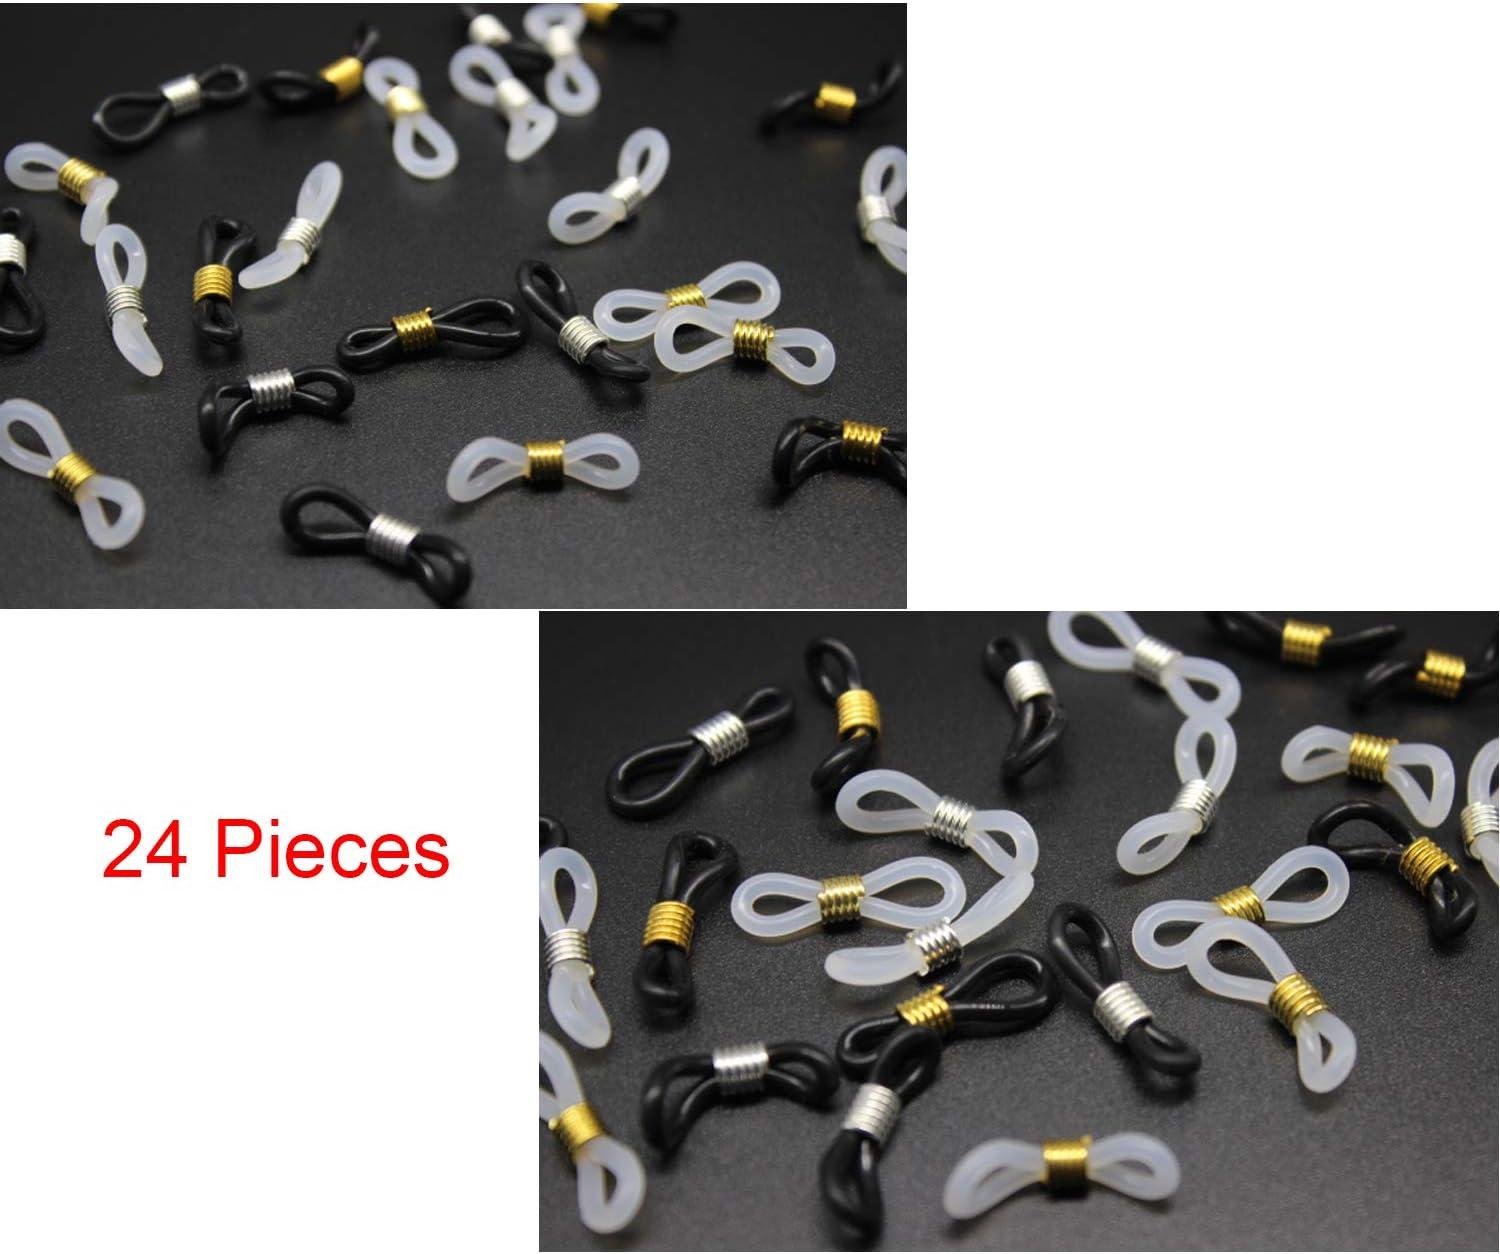 eyeglass chain ends adjustable spring rubber